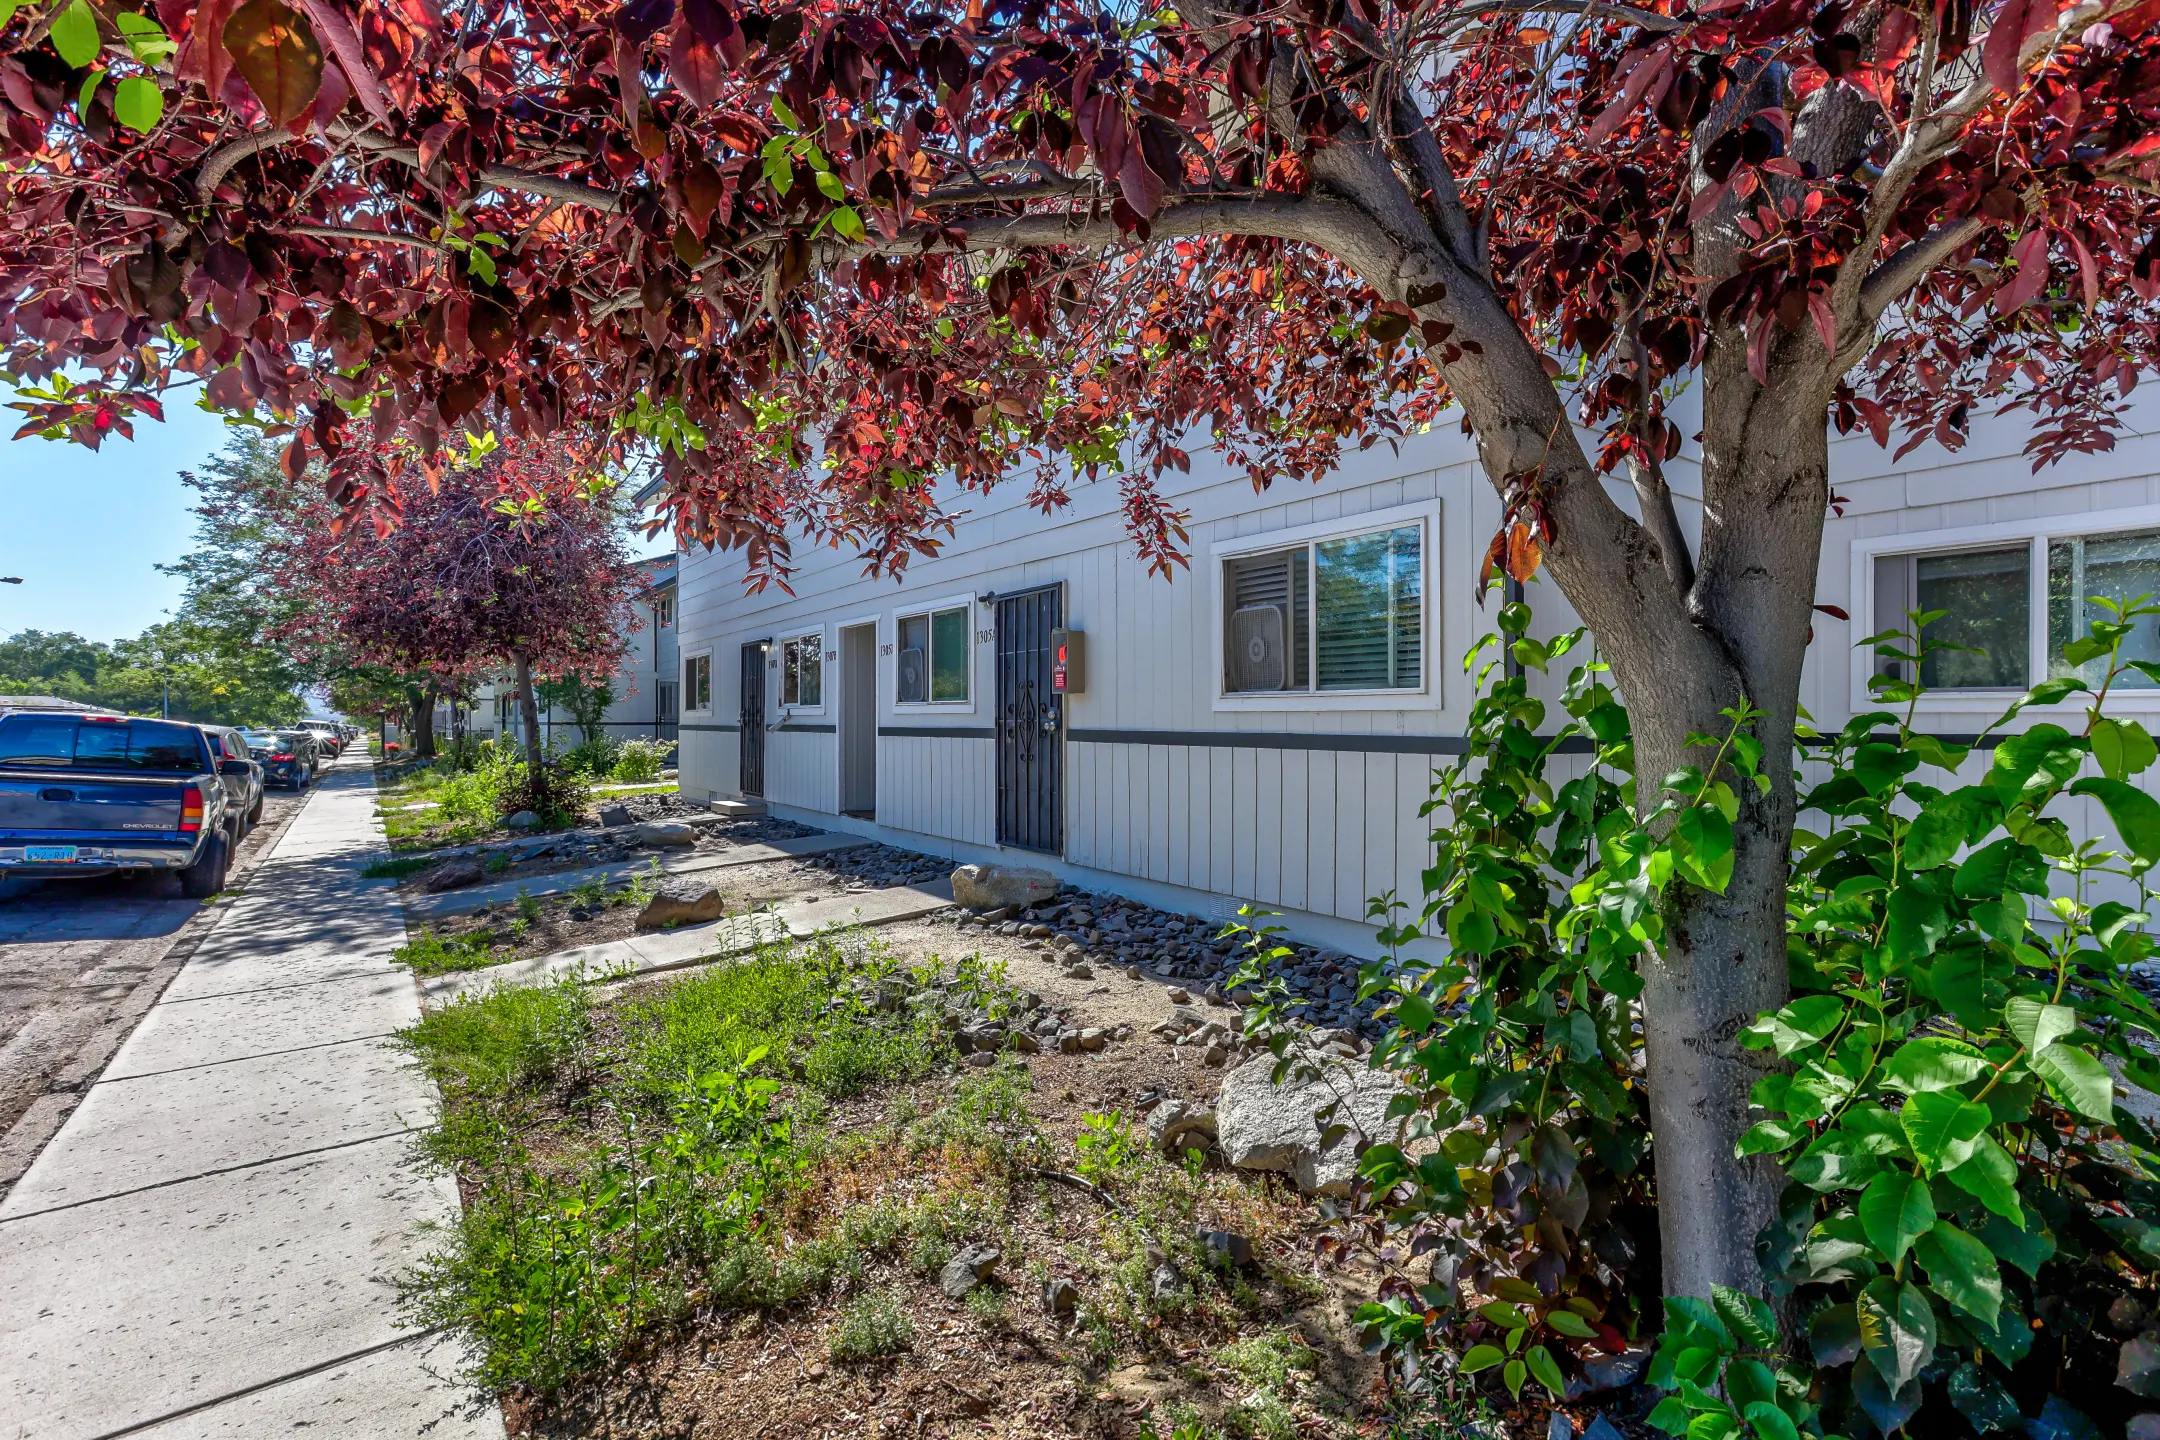 Building - Sierra View Townhomes - Carson City, NV